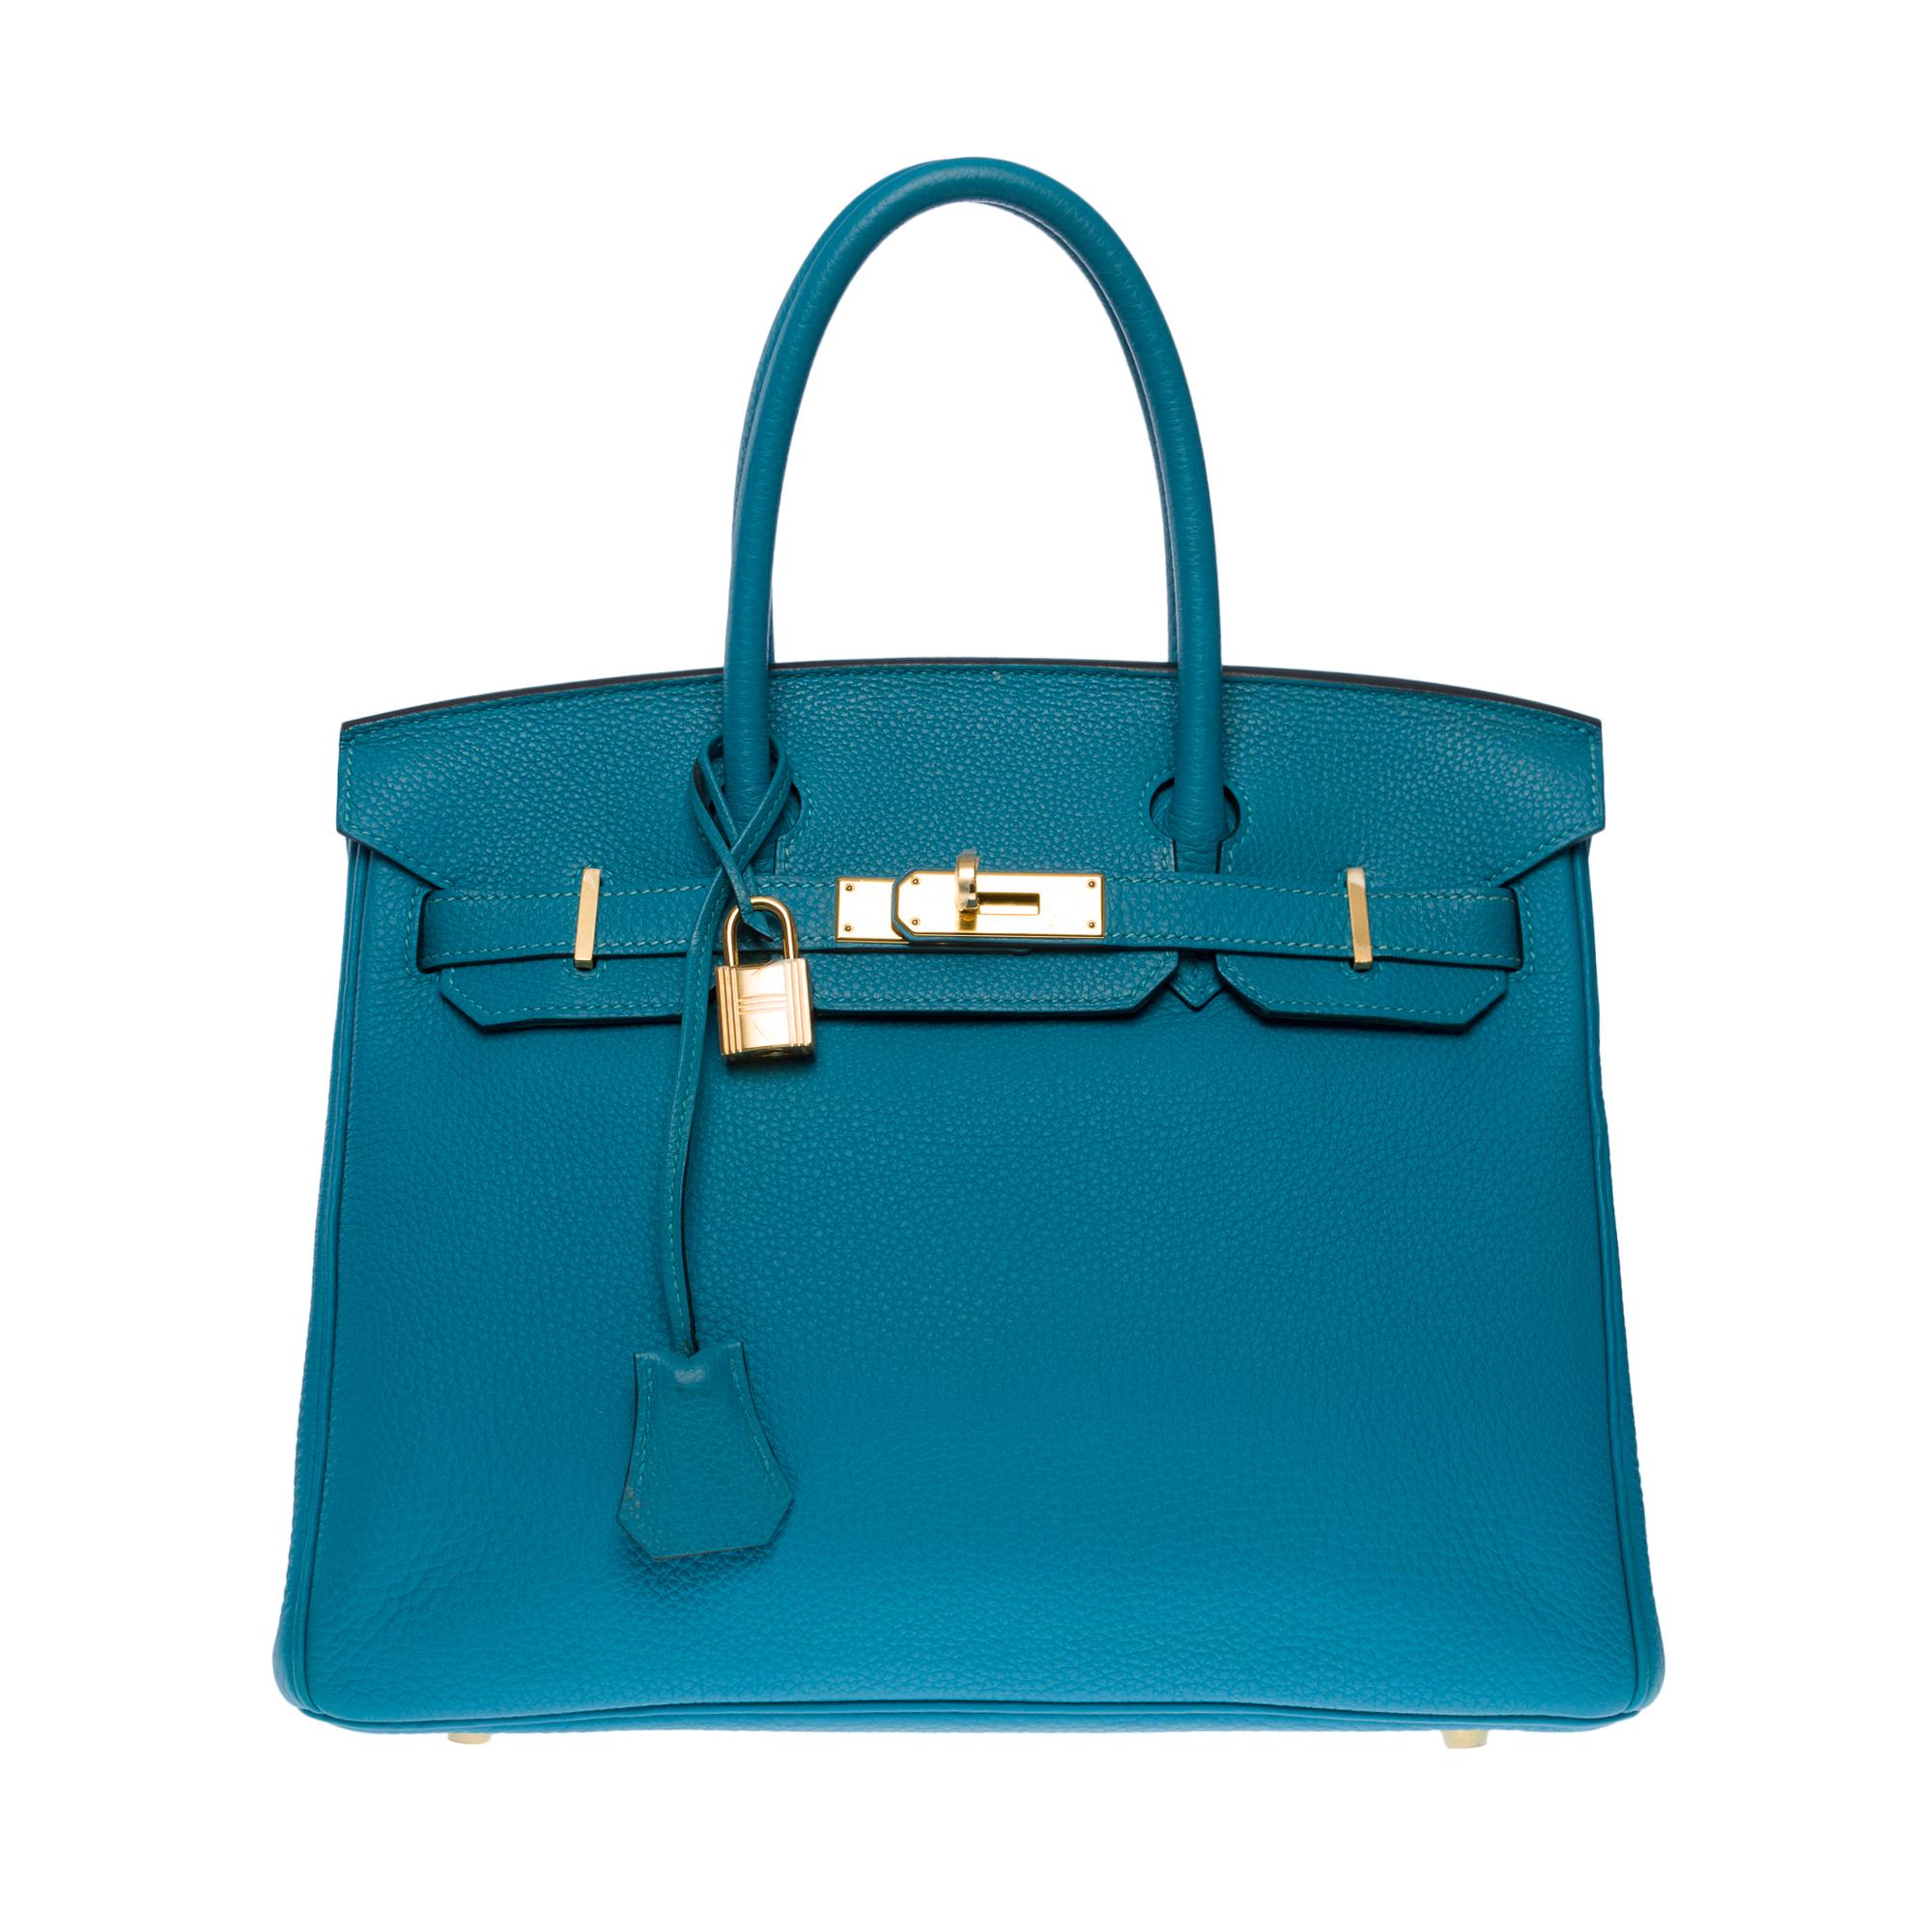 Exceptional & Rare Hermes Birkin 30 handbag in Turquoise Togo leather, gold-plated metal hardware, double blue leather handle allowing a hand-carried

Flap closure
Inner lining in blue leather, one zippered pocket, one patch pocket
Signature: